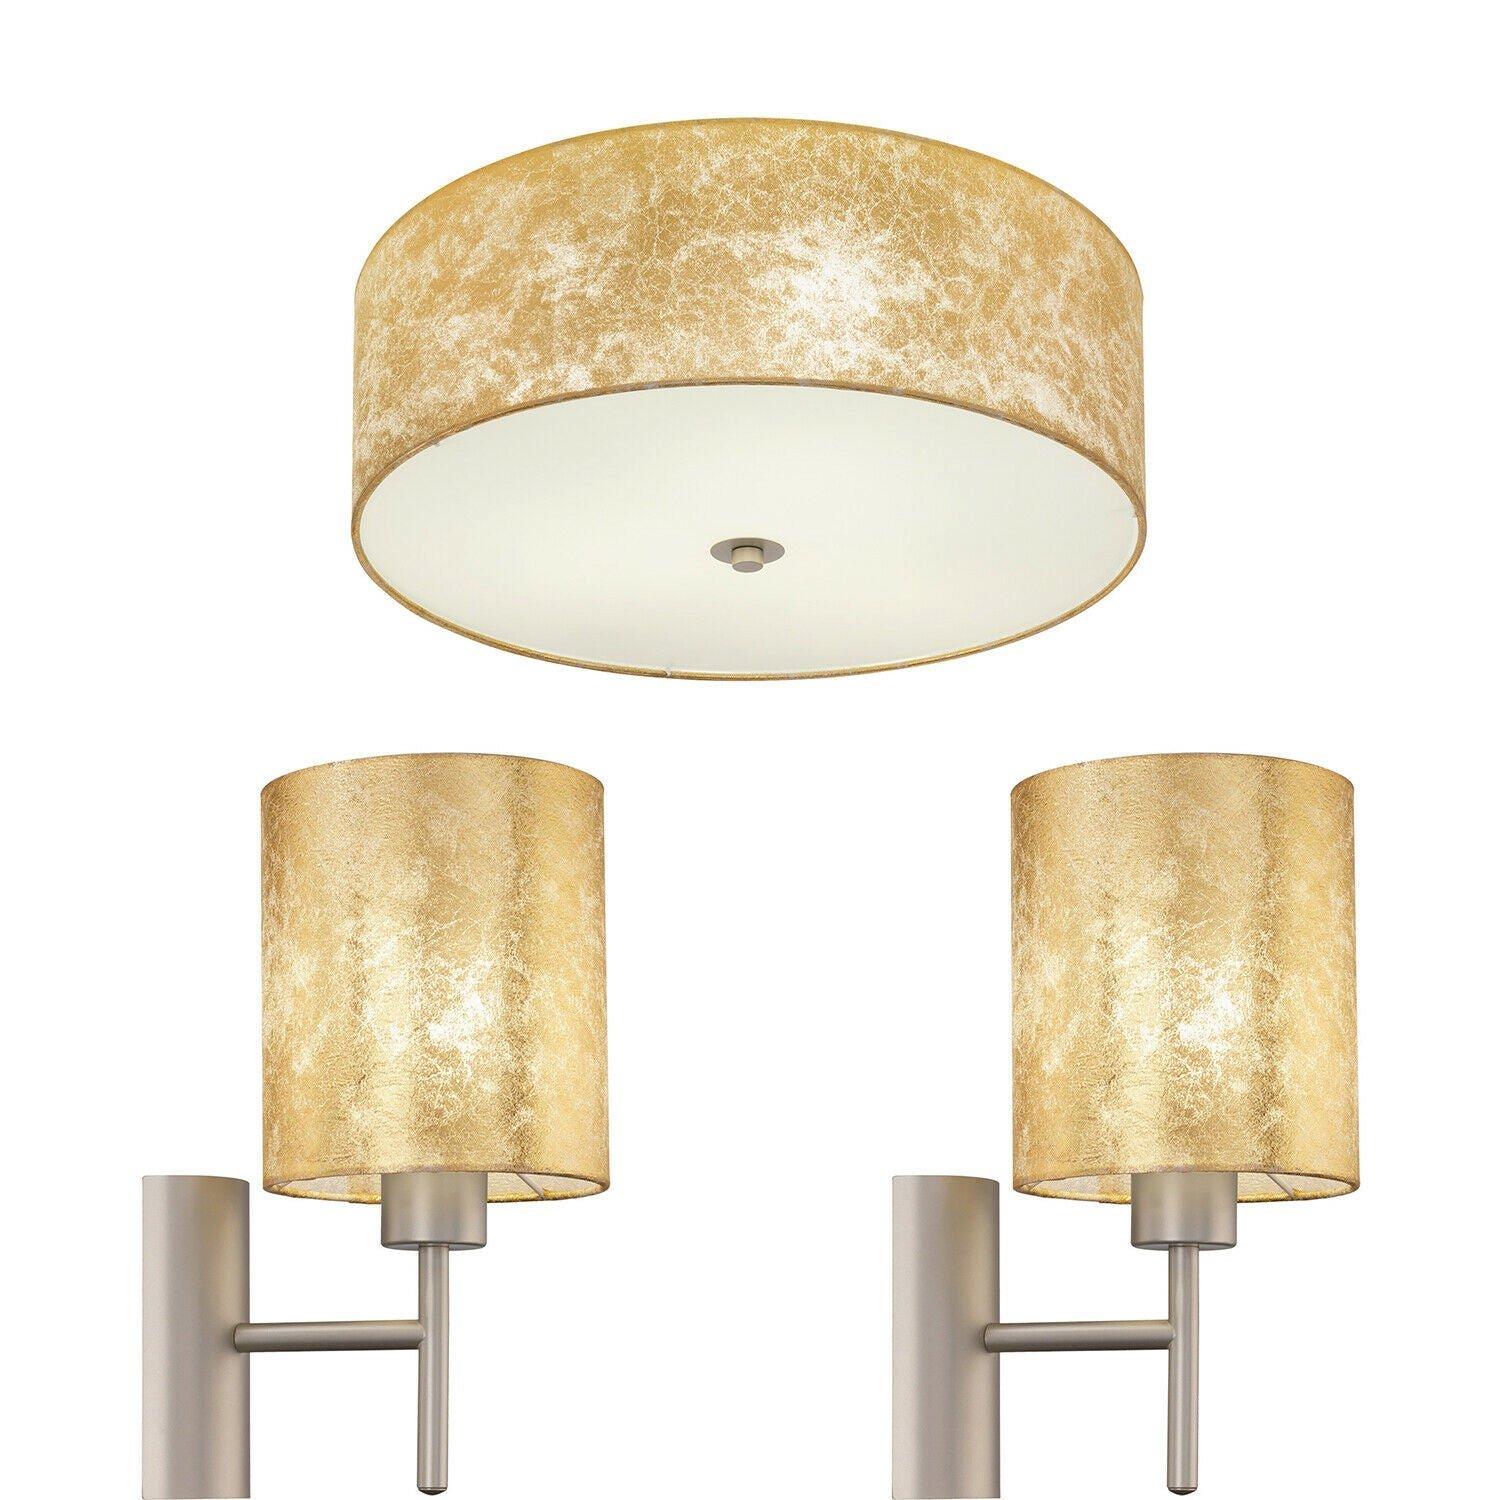 Low Ceiling Light & 2x Matching Wall Lights Gold Fabric Round Diffused Shade